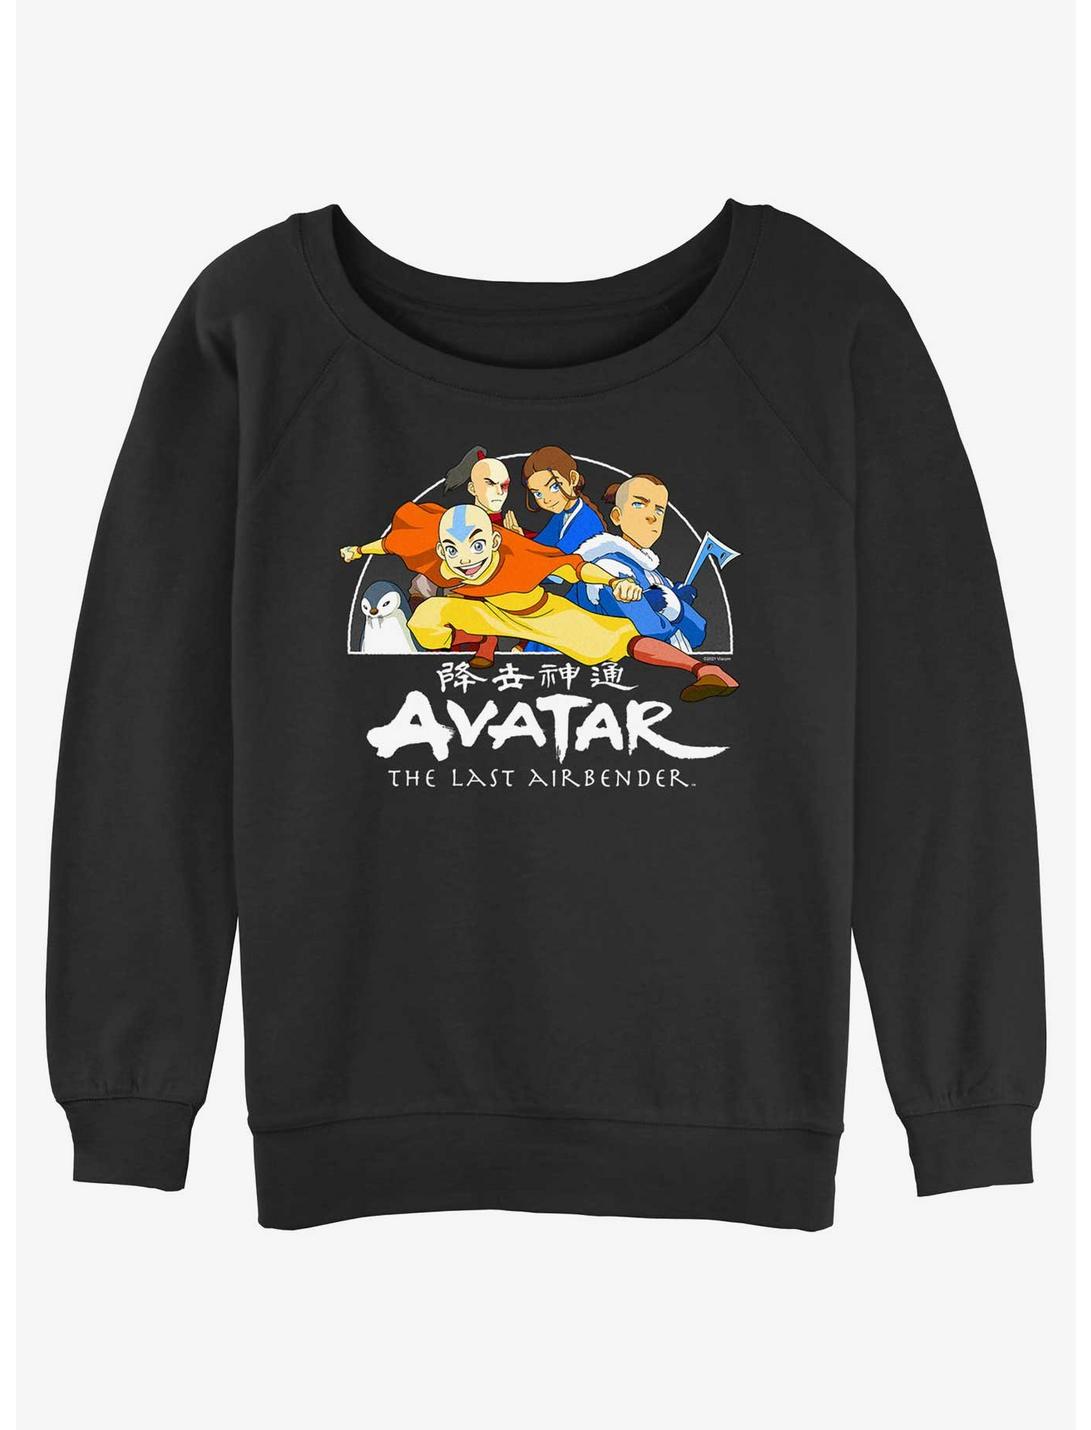 Avatar: The Last Airbender Ready For Action Womens Slouchy Sweatshirt, BLACK, hi-res